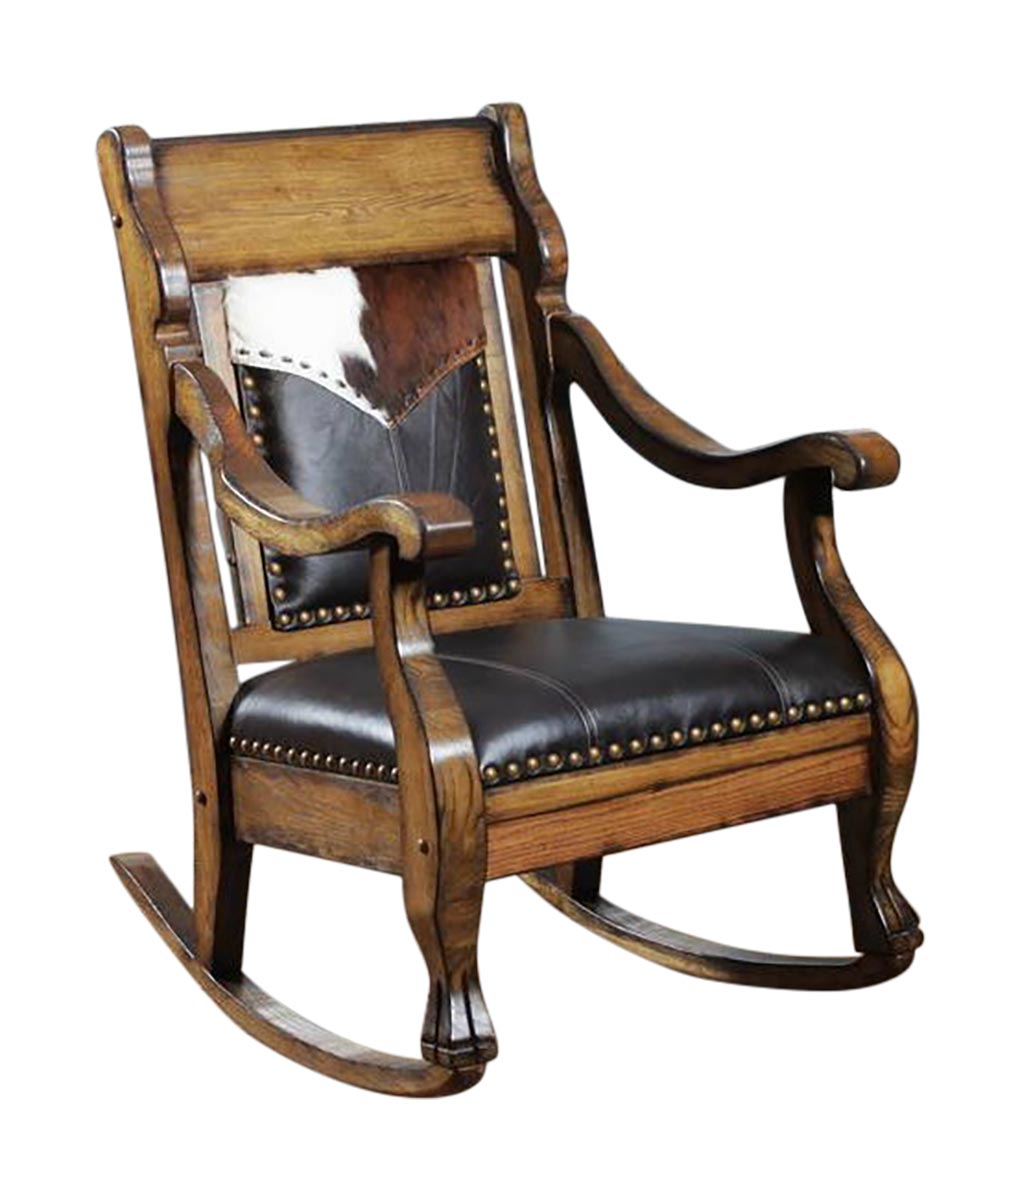 Western Style Rocking Chair With Cowhide Yoke Leather Seat And Back